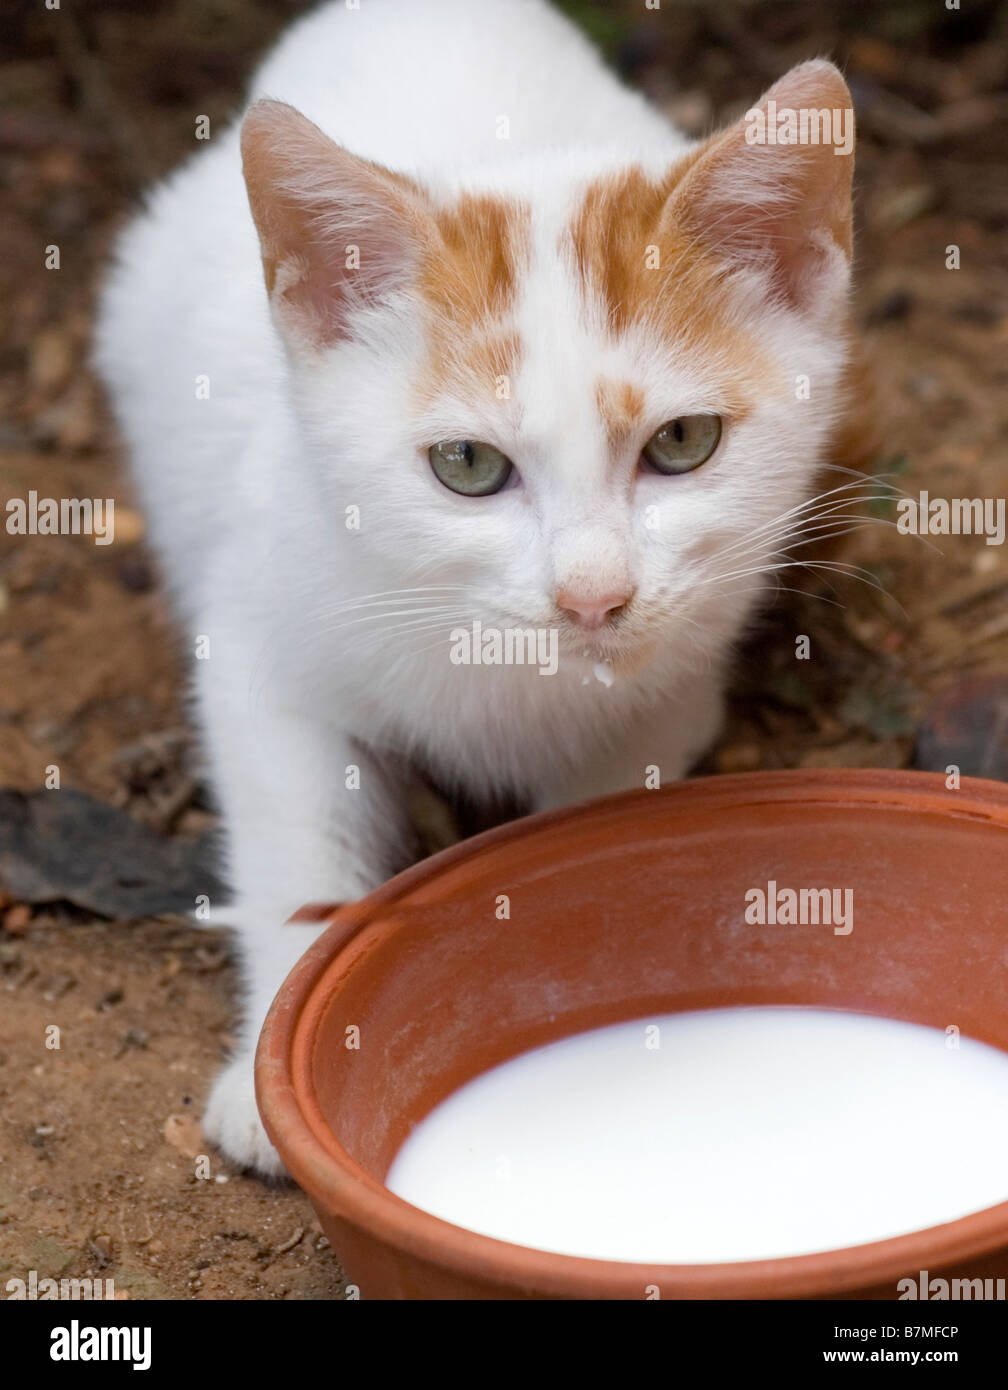 Kitten with milk bowl, vertical close-up Stock Photo